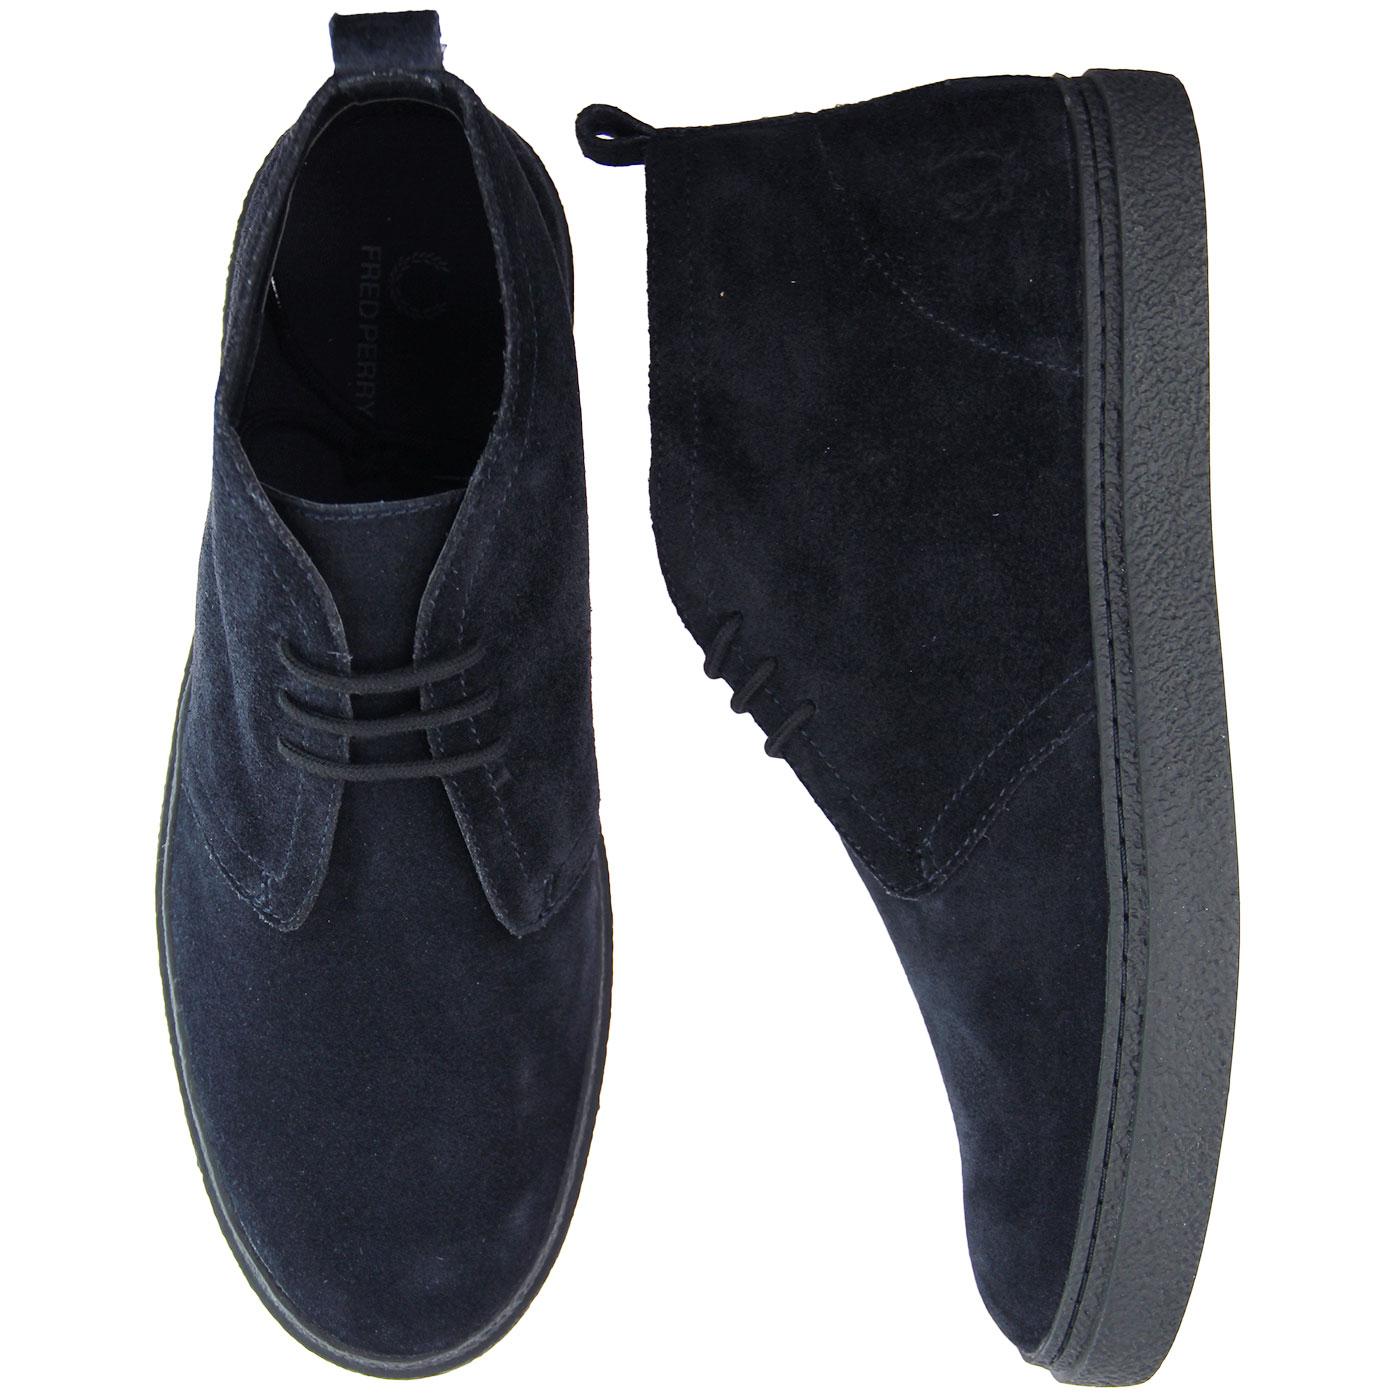 fred perry chukka boots